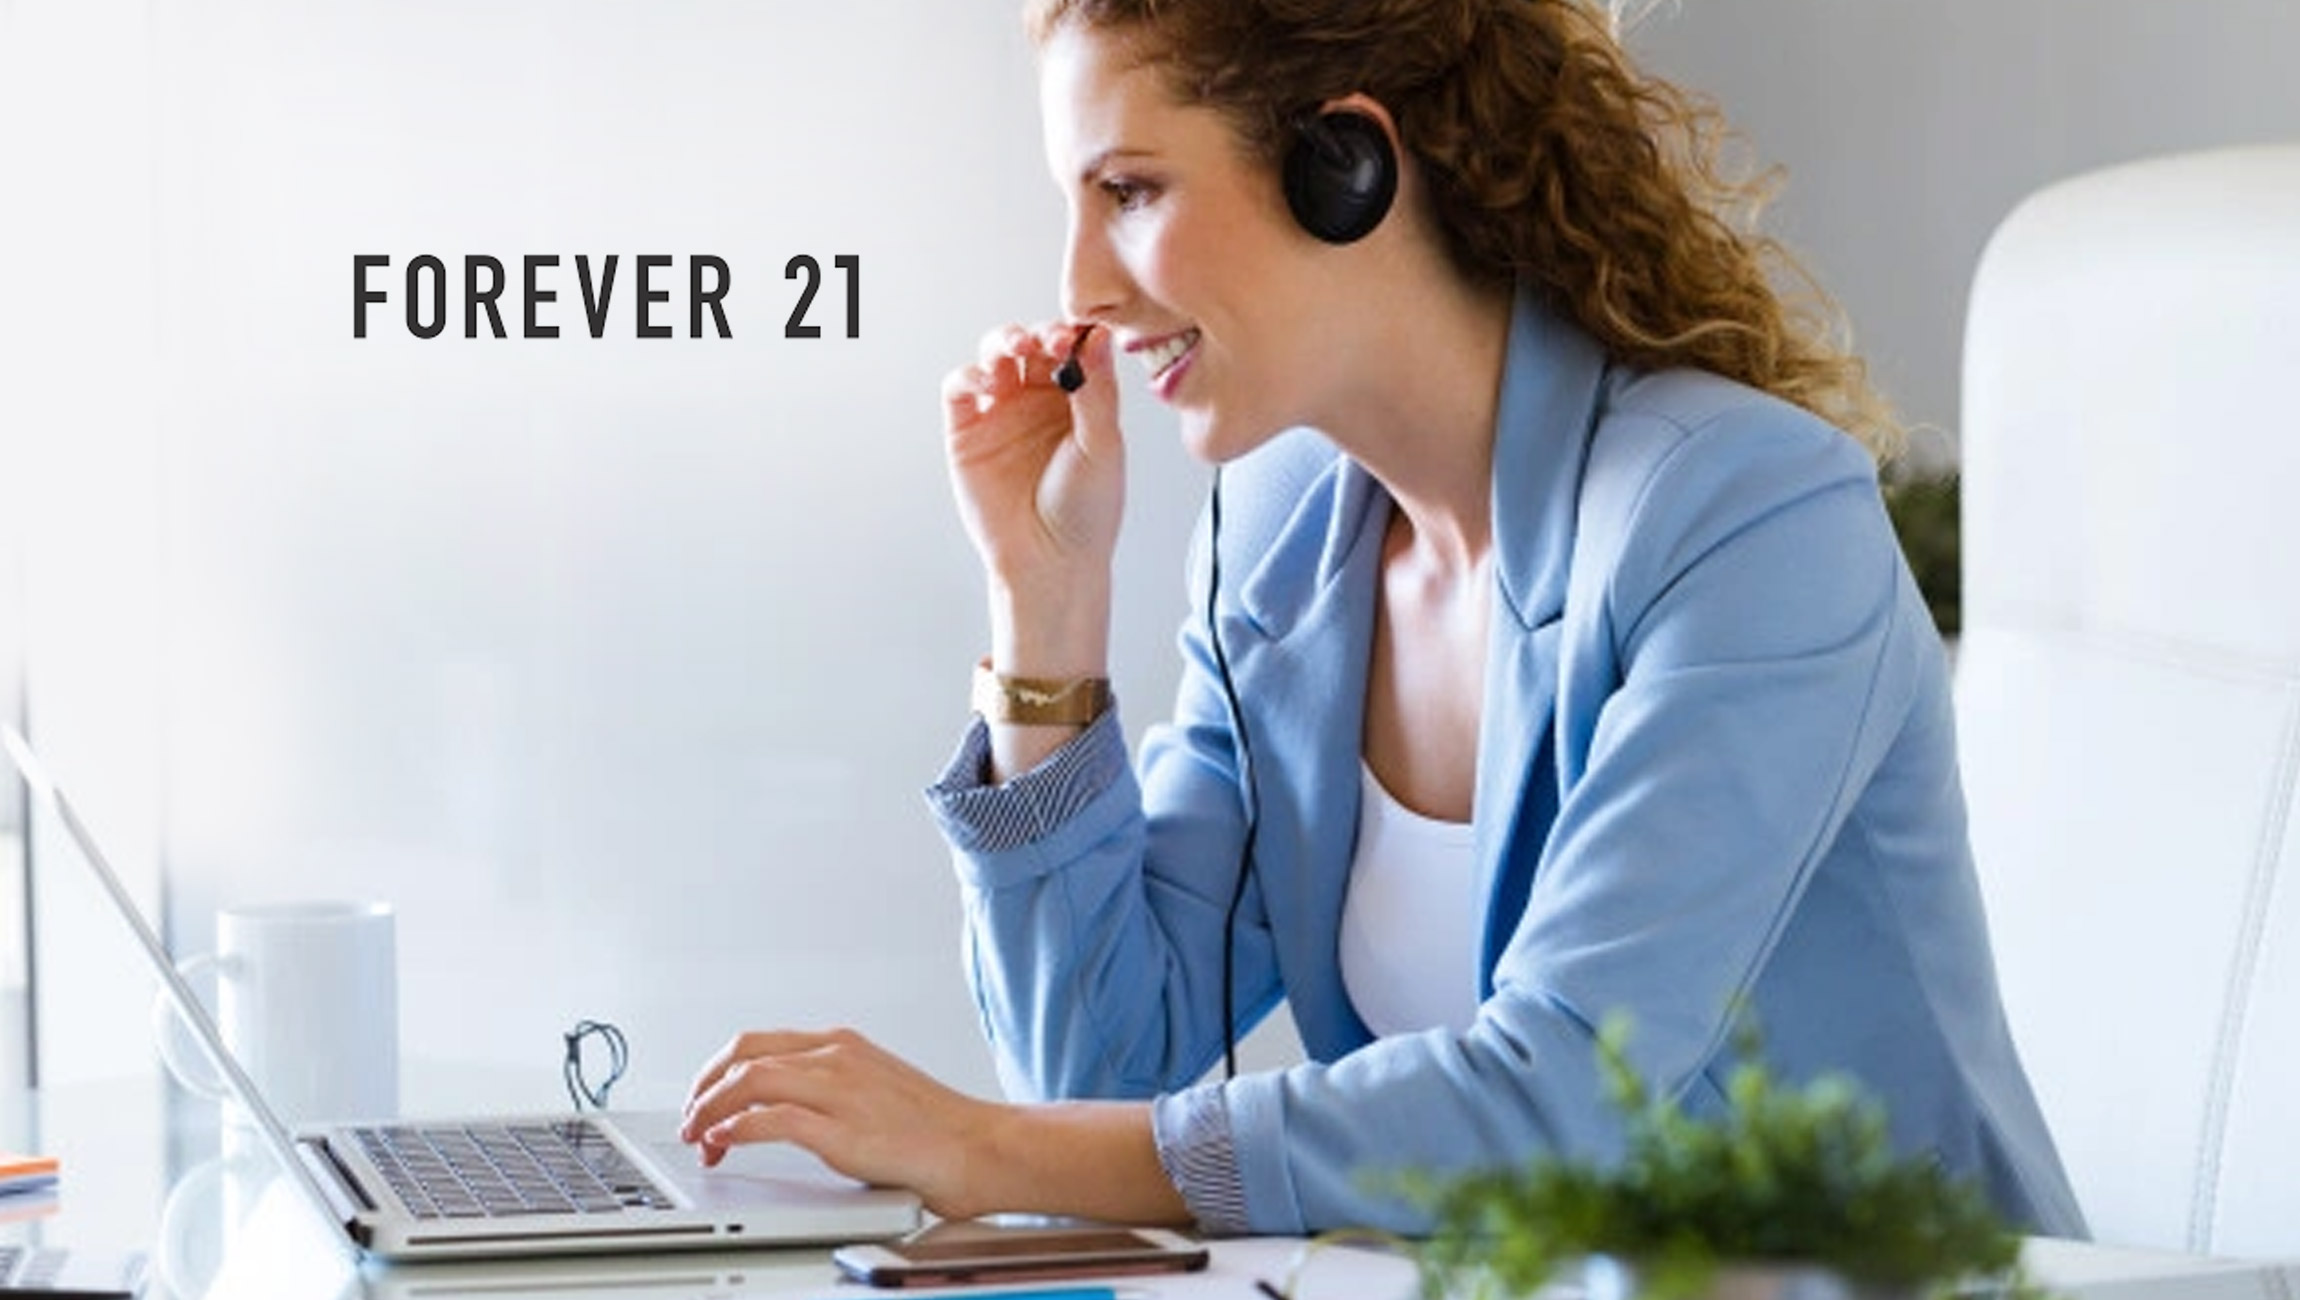 FOREVER 21 Taps Edify for Cloud-native Contact Center and Unified Communications; Sees Double-digit Improvement in Top KPIs